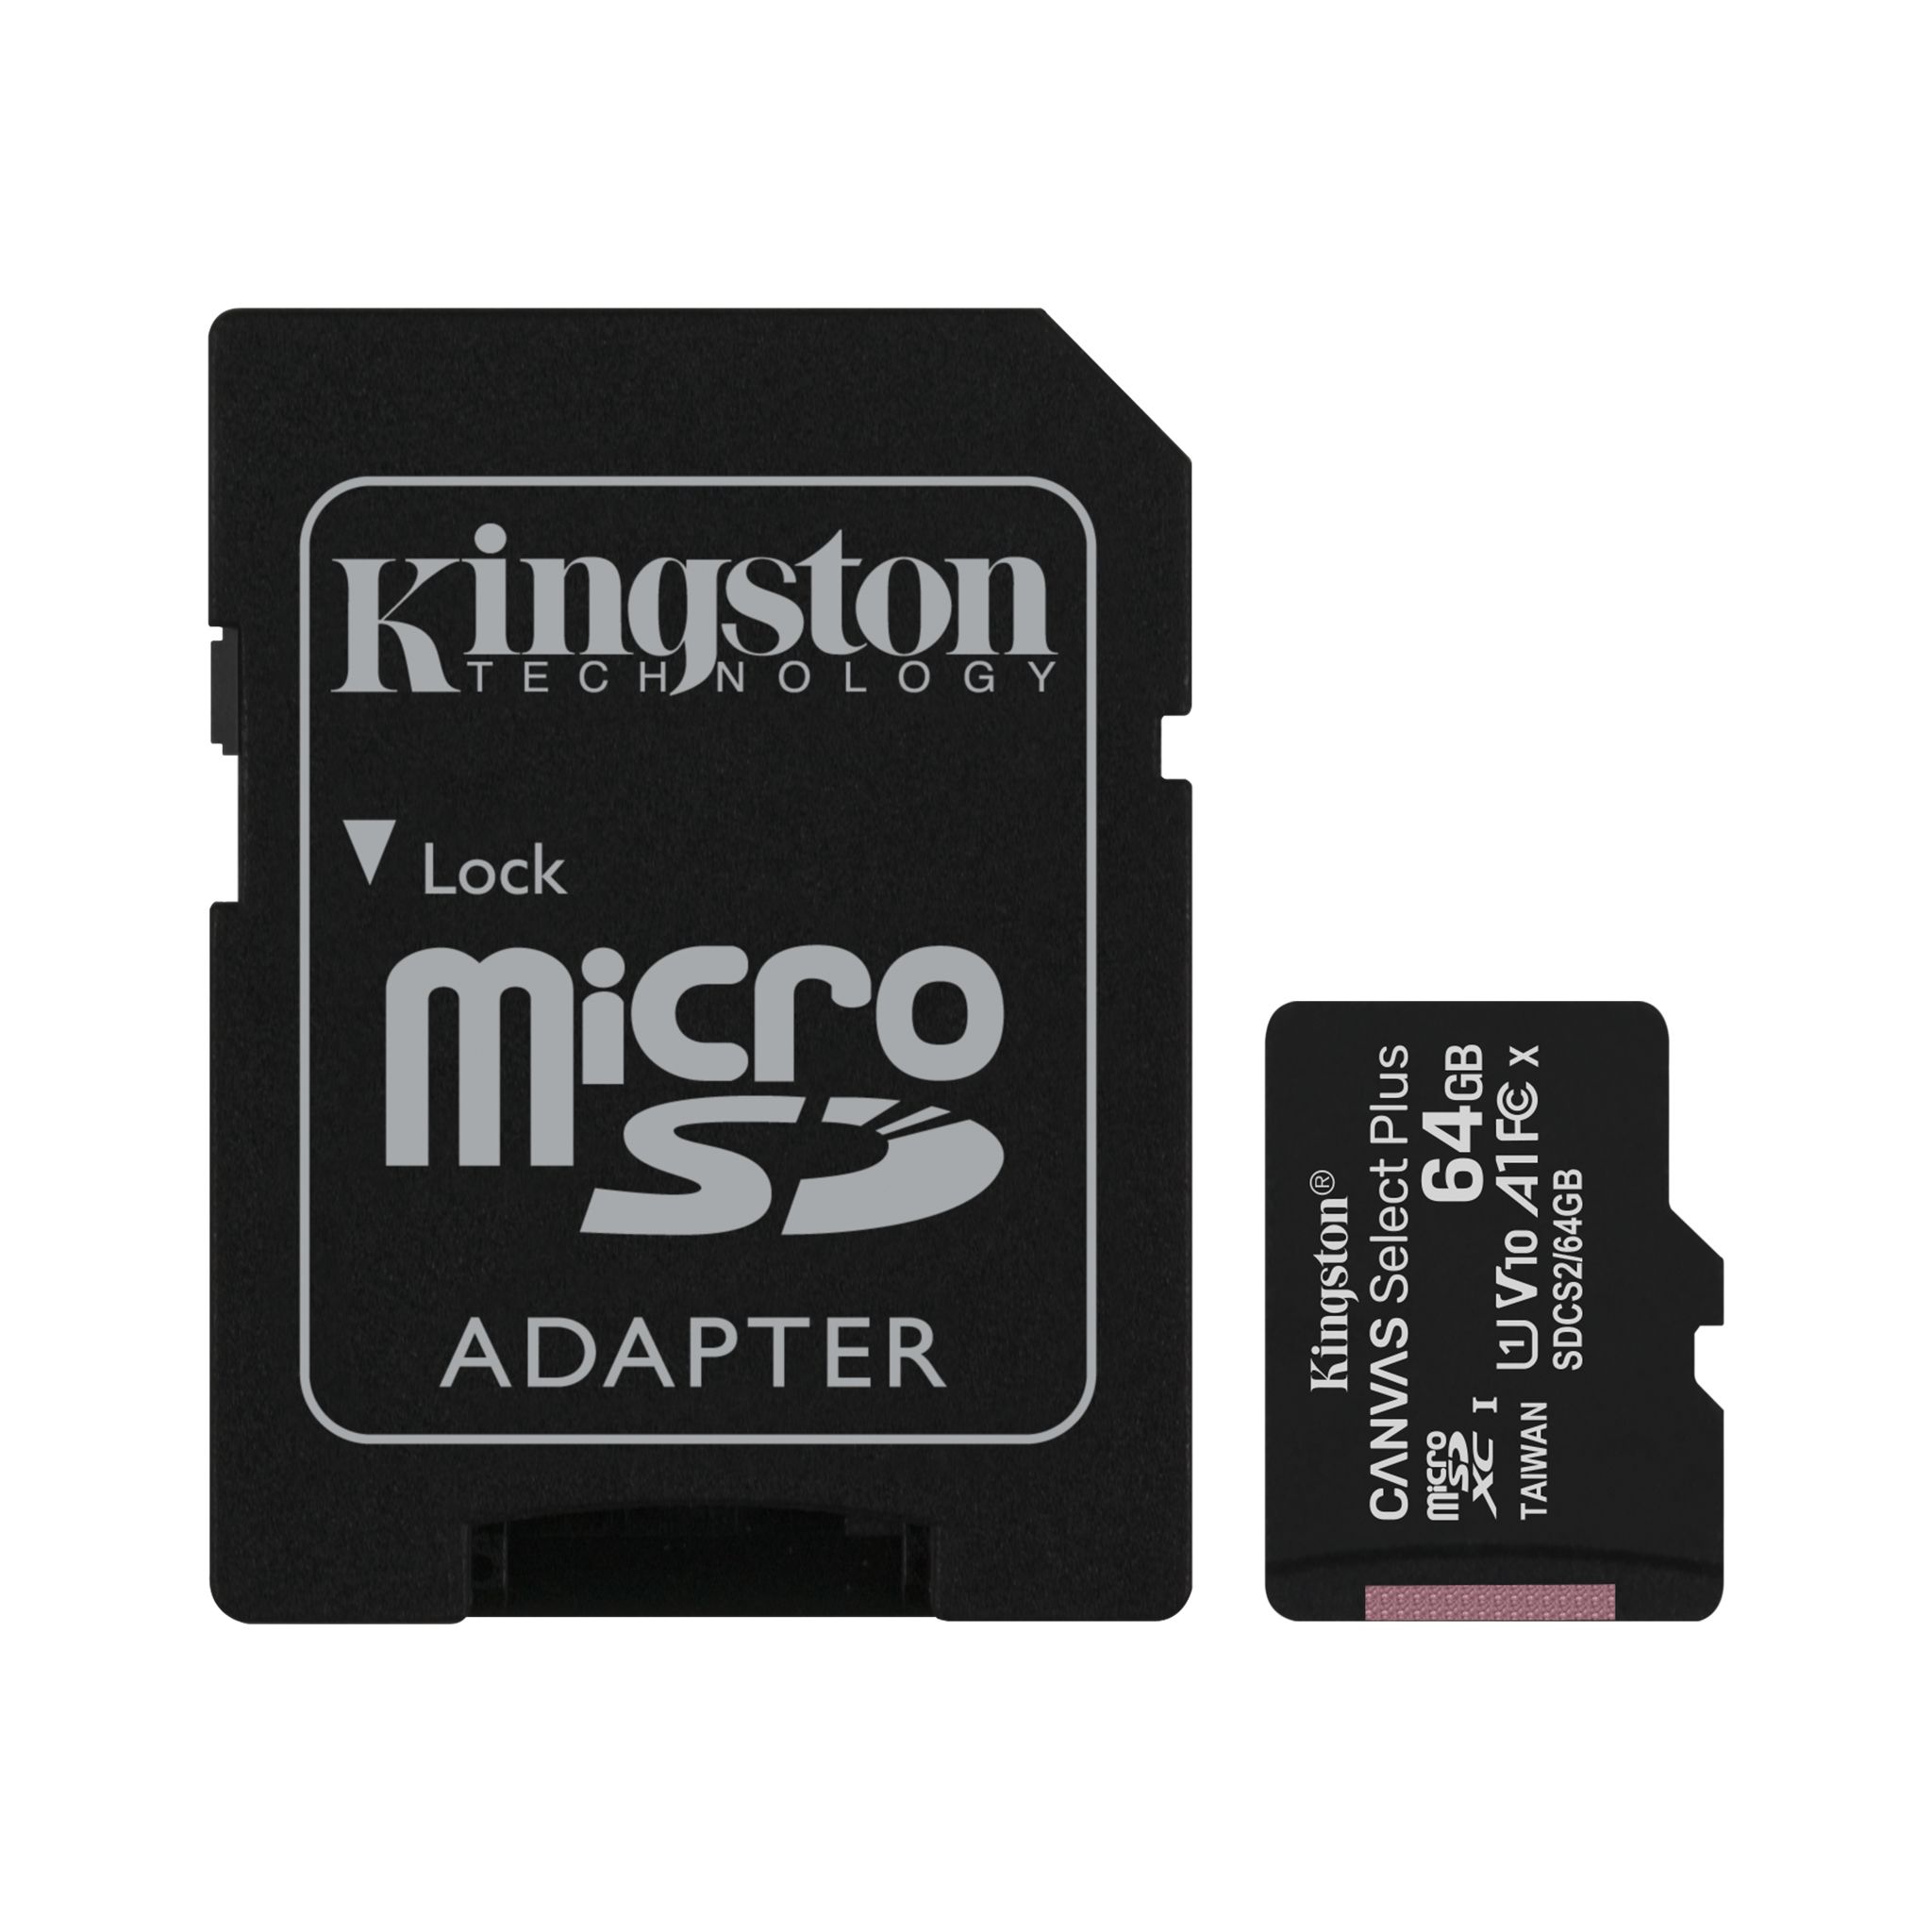 Kingston 64GB Samsung Galaxy Tab 4 8.0 SM-T330 MicroSDXC Canvas Select Plus Card Verified by SanFlash. 100MBs Works with Kingston